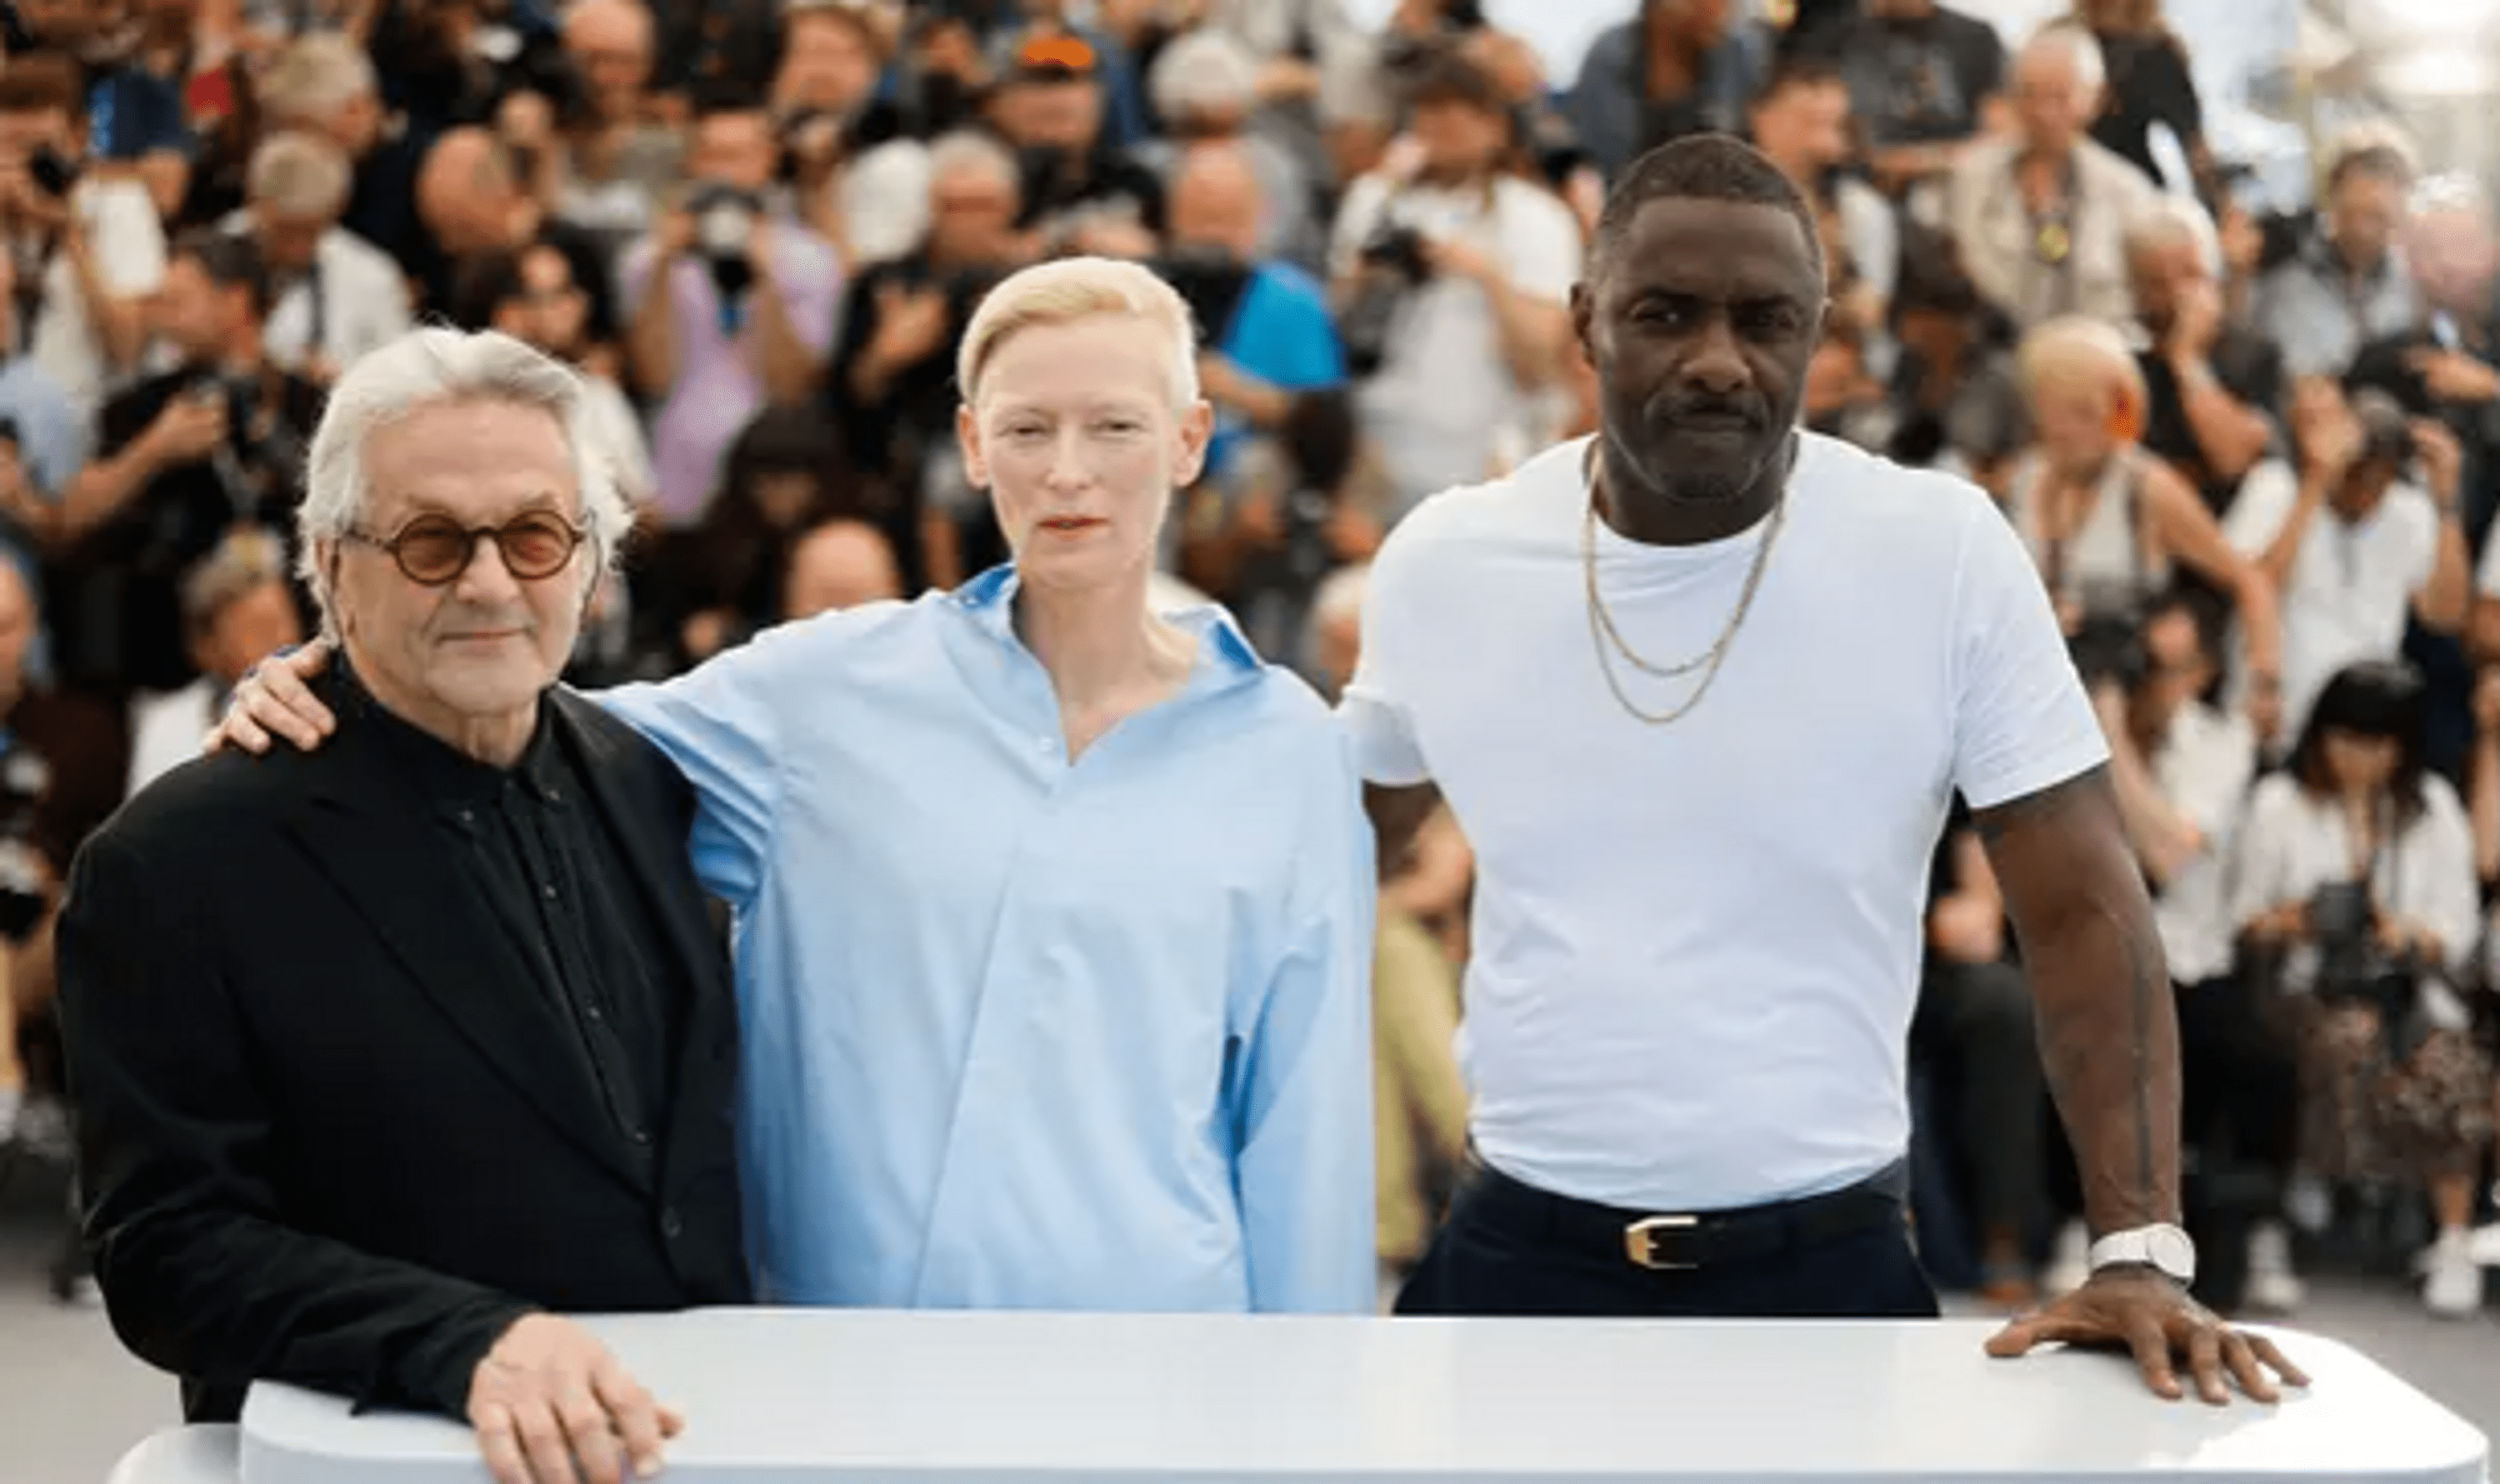 ”tilda-swinton-and-idris-elba-at-the-premiere-of-their-new-film-at-the-cannes-film-festival”